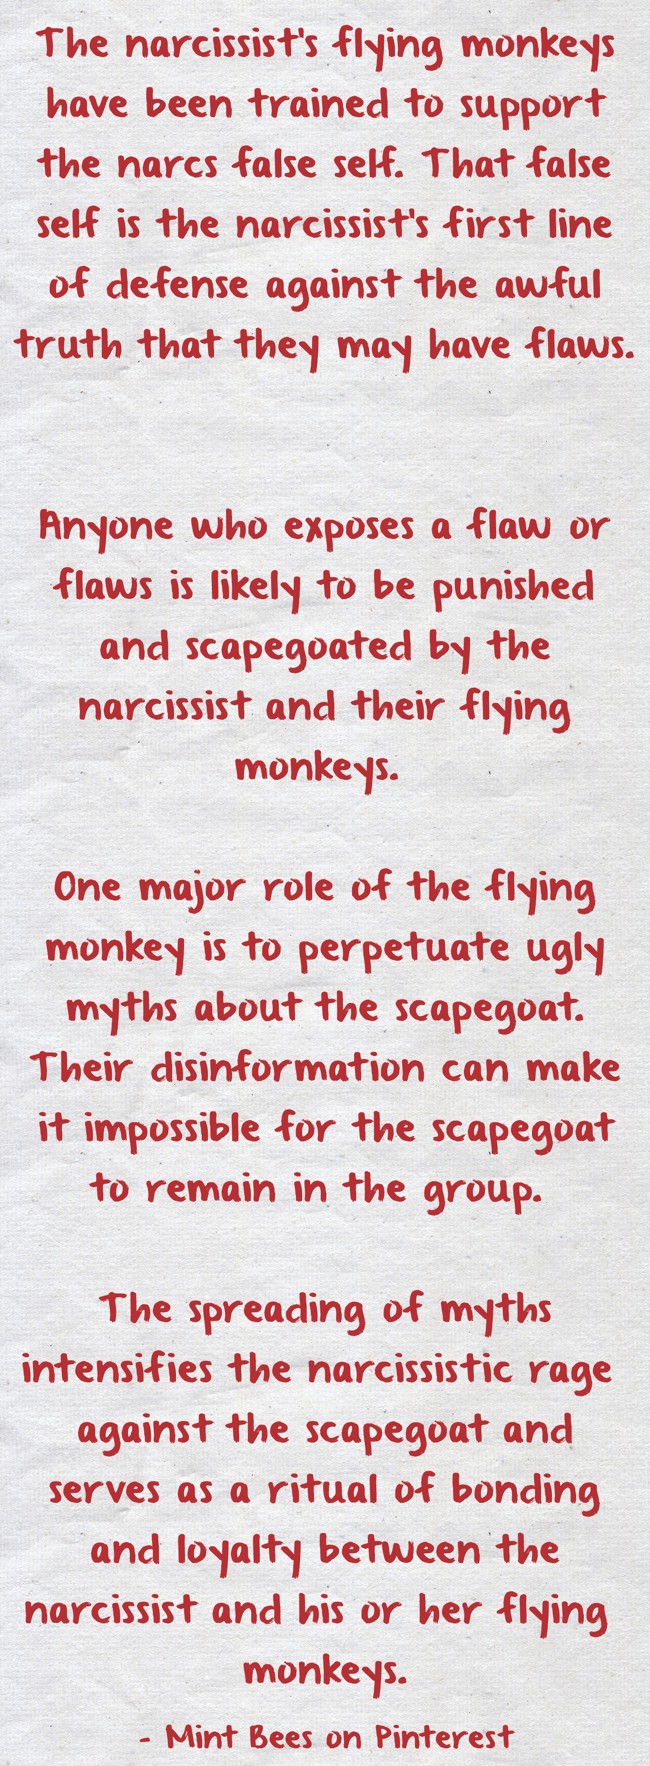 Narcissists and Flying Monkeys: Why People Submit to Narcissists